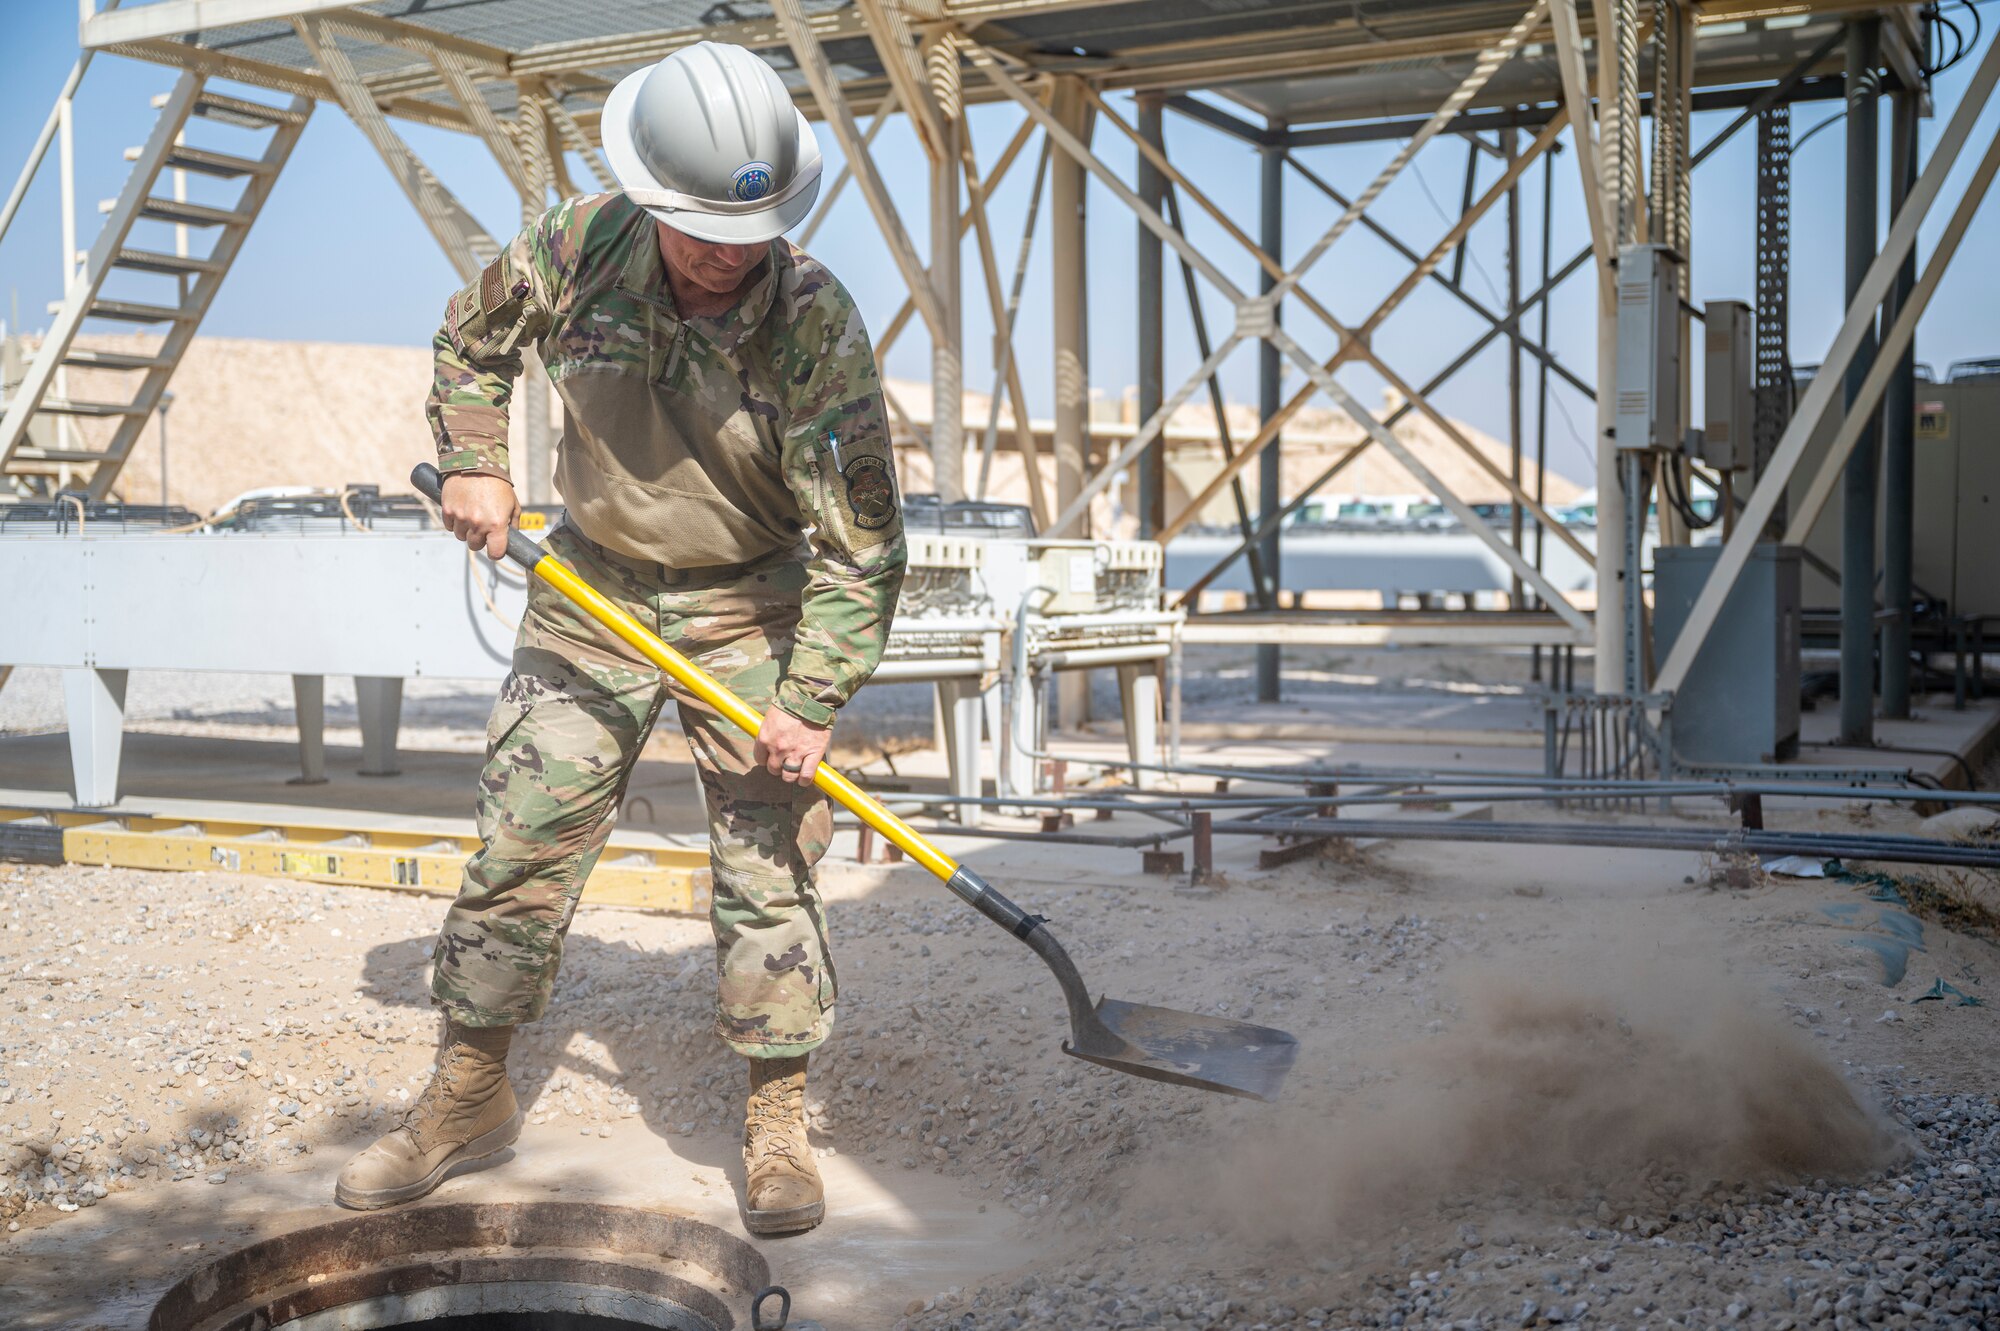 A member of the U.S. Air Forces Central, Air Force Forces A67 Engineering and Installation team removes dirt around the entrance to a communications maintenance hole at Ali Al Salem Air Base, Kuwait, on Oct. 19, 2021.